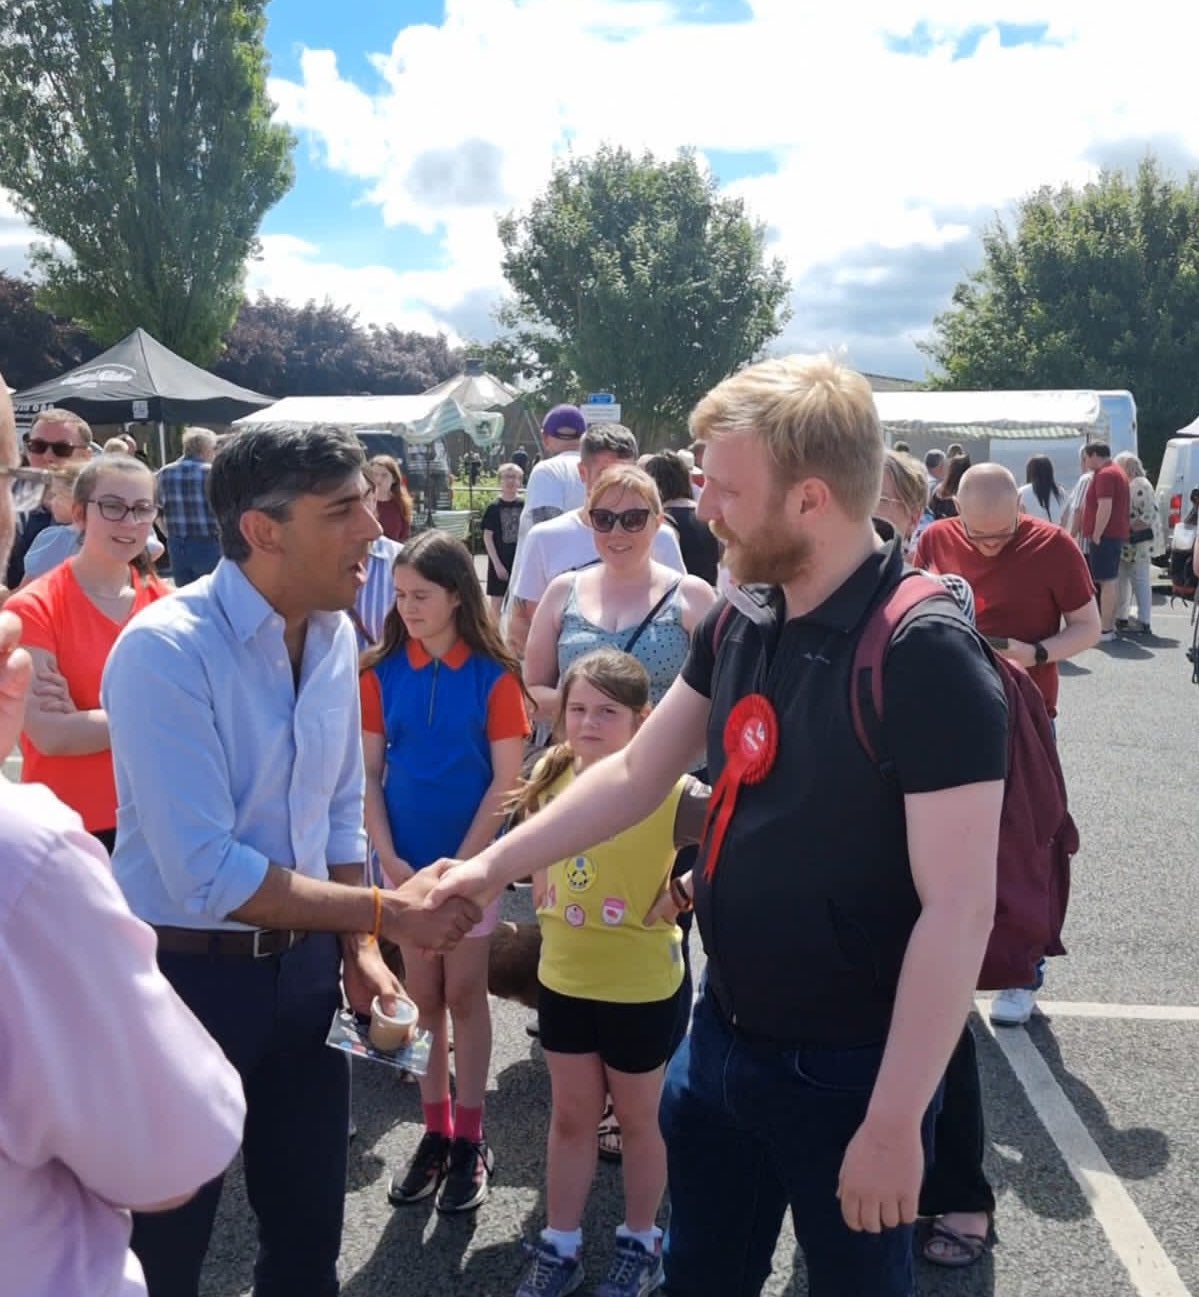 Tom Wilson met the prime minister briefly on Sunday, shaking hands while both out campaigning in the constituency